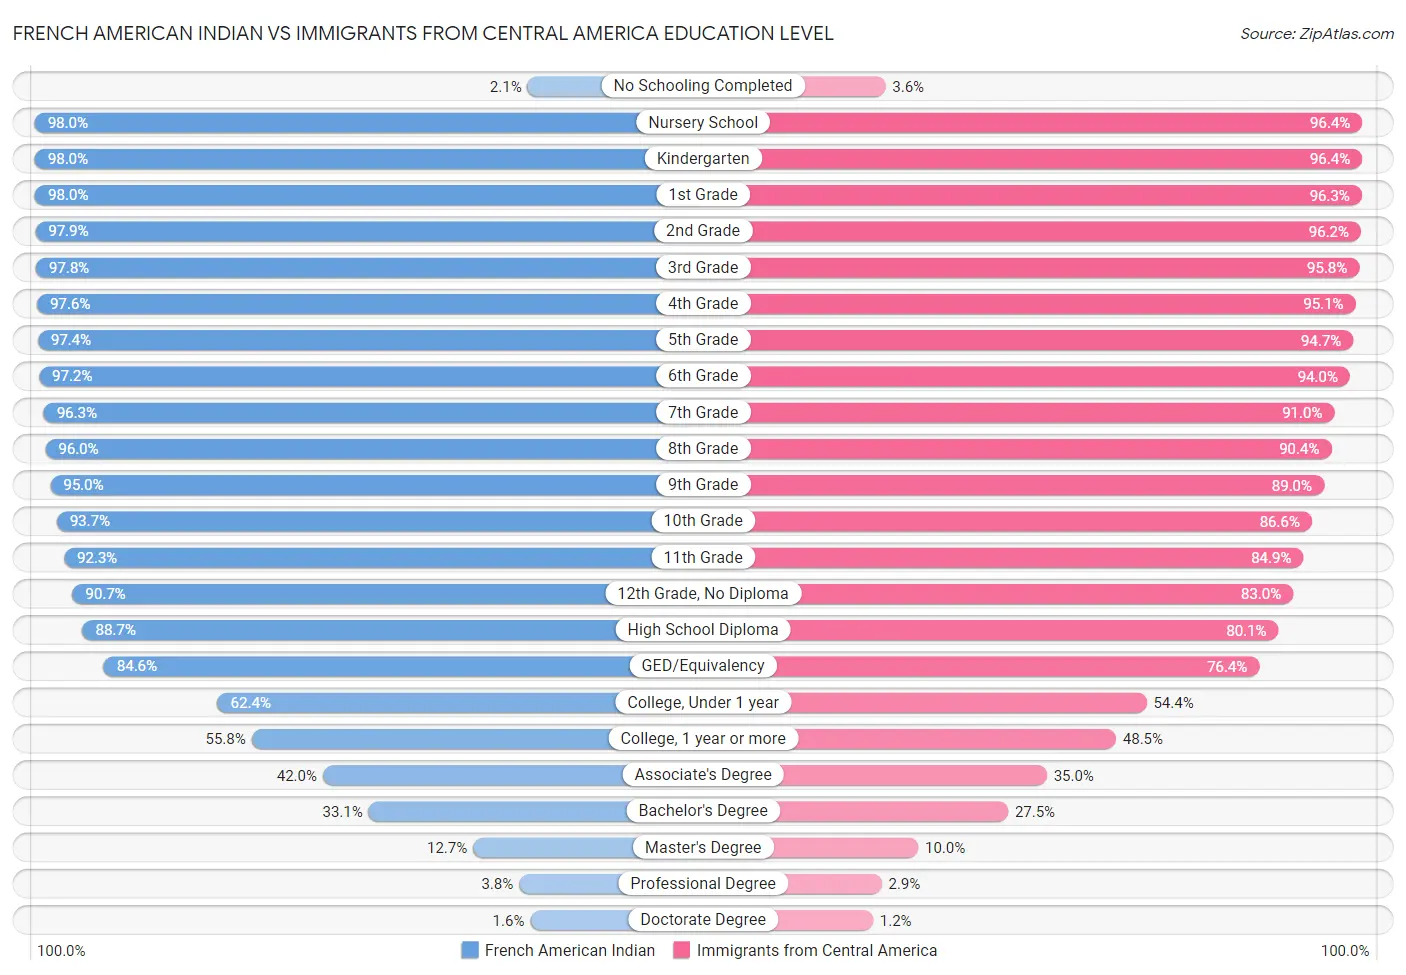 French American Indian vs Immigrants from Central America Education Level